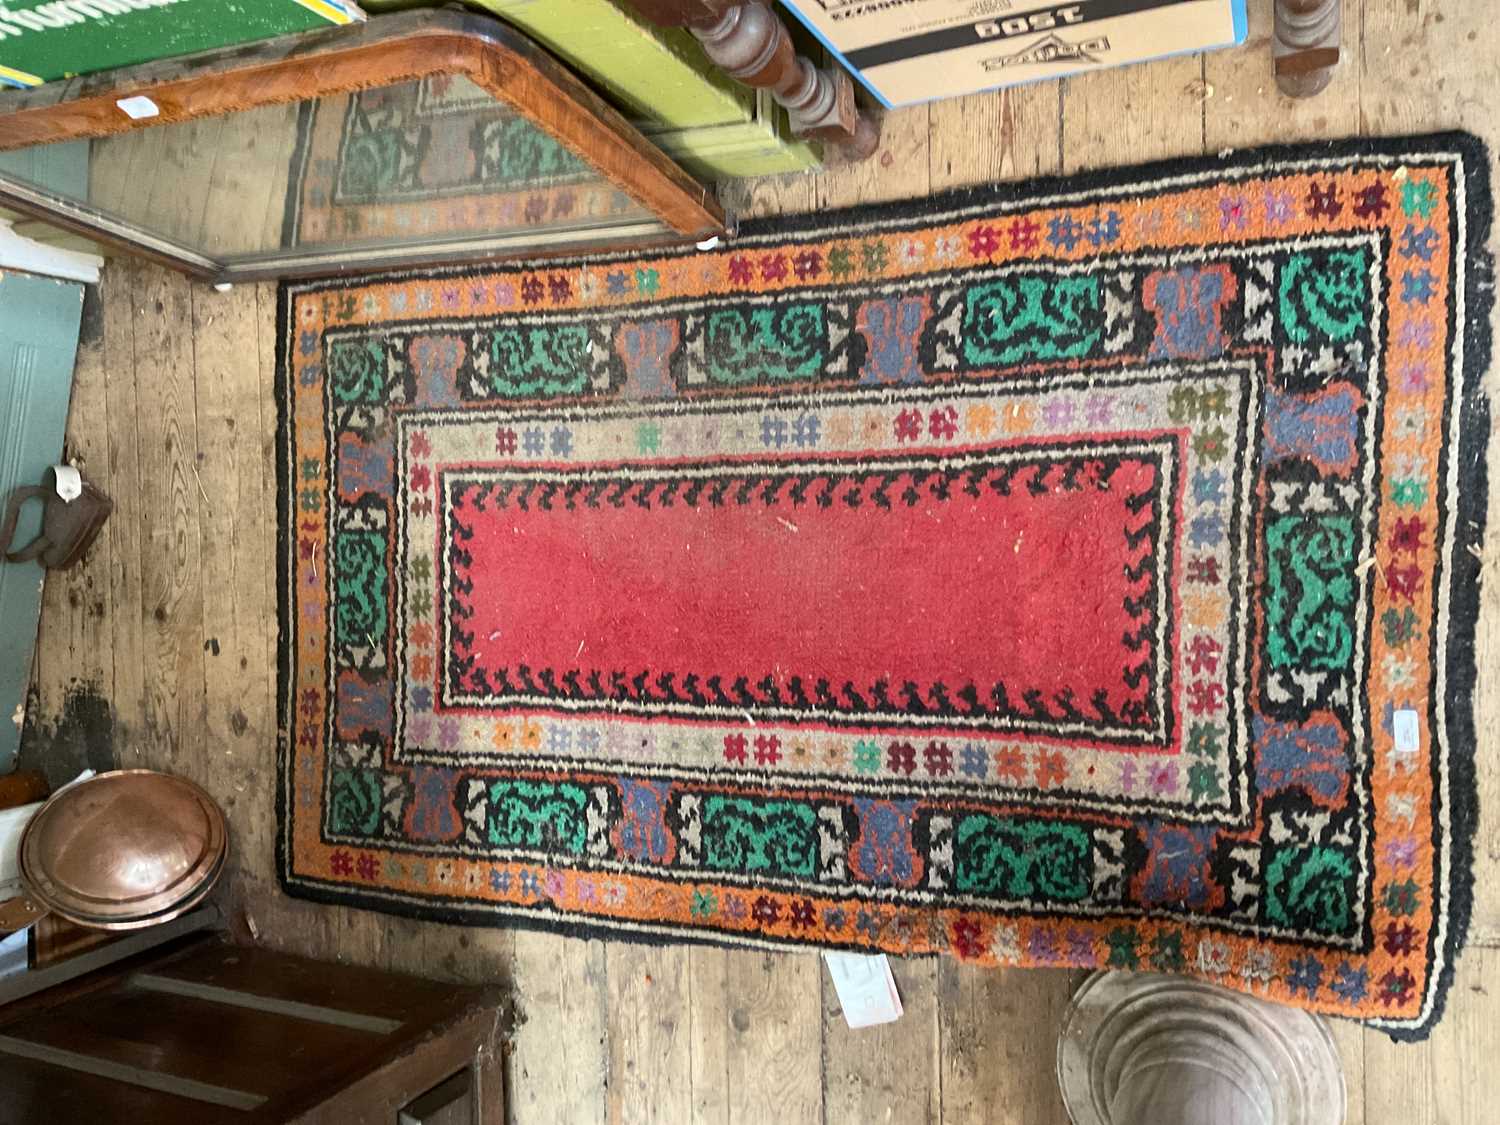 A decorative rug with floral decoration in shades of orange, green, red, black and white, 156 x